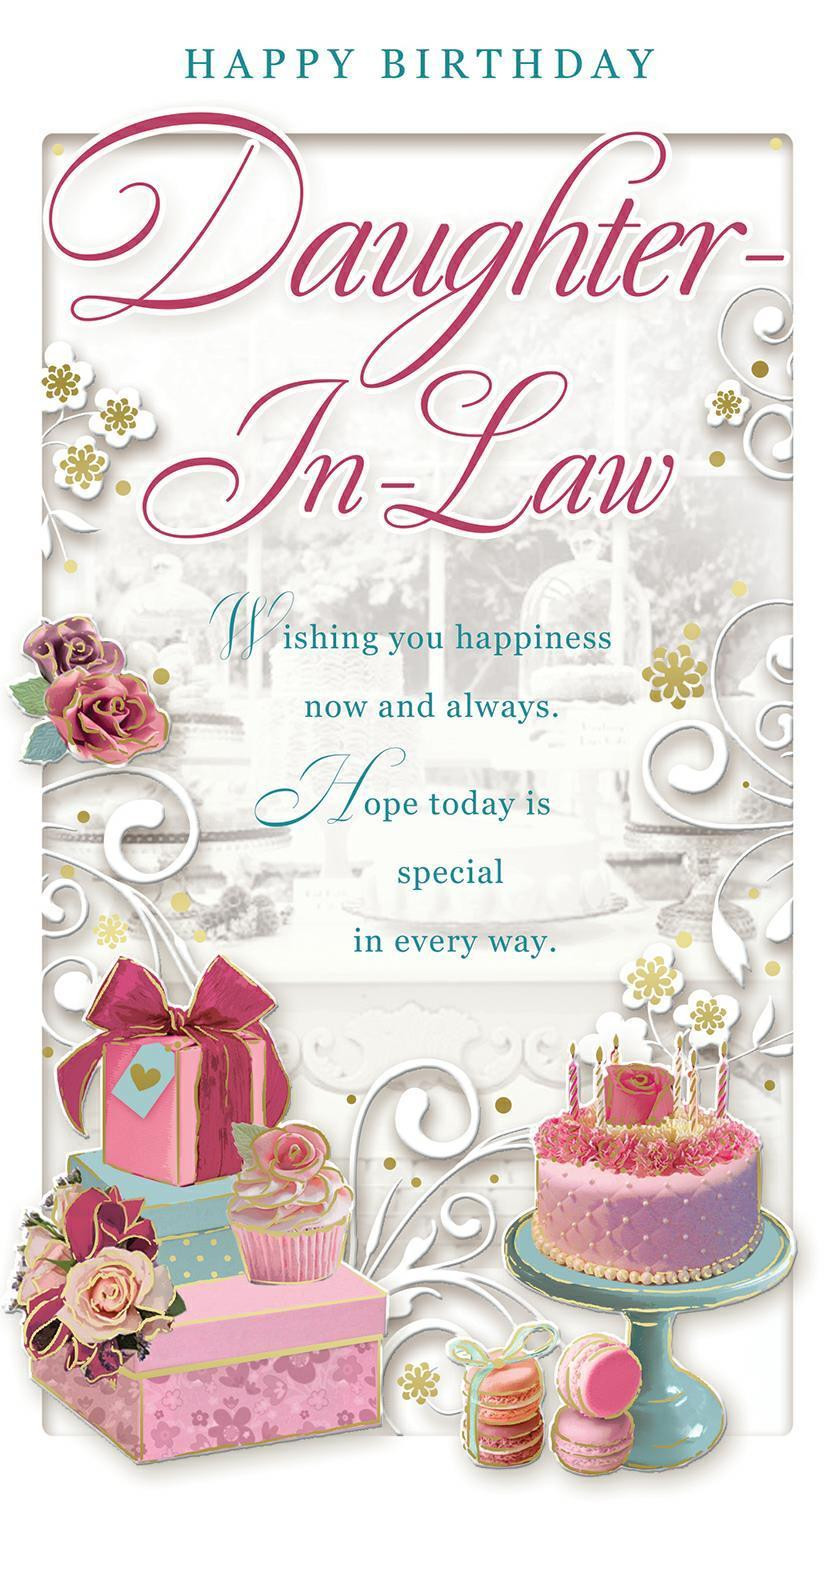 Happy Birthday Daughter Cards
 HAPPY BIRTHDAY DAUGHTER IN LAW CARD CUPCAKE ROSES GIFTS